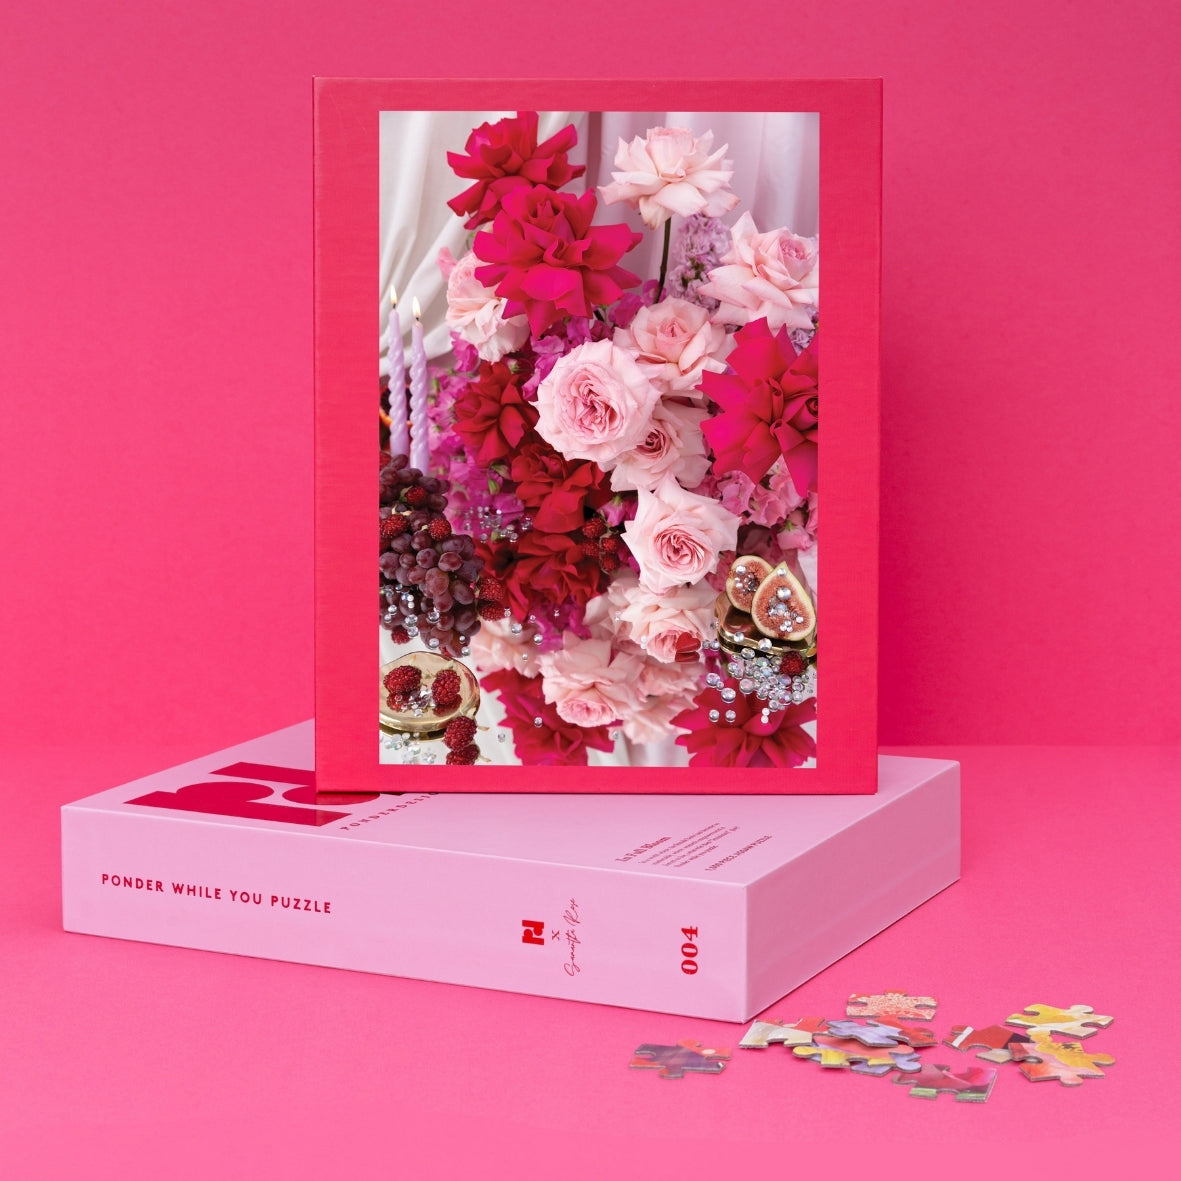 Ponder Design Co's In Full Bloom 1,000 piece jigsaw puzzle designed in collaboration with Samantha Rose. Hero puzzle packaging with florals, figs and pinks. Ponder while you puzzle.